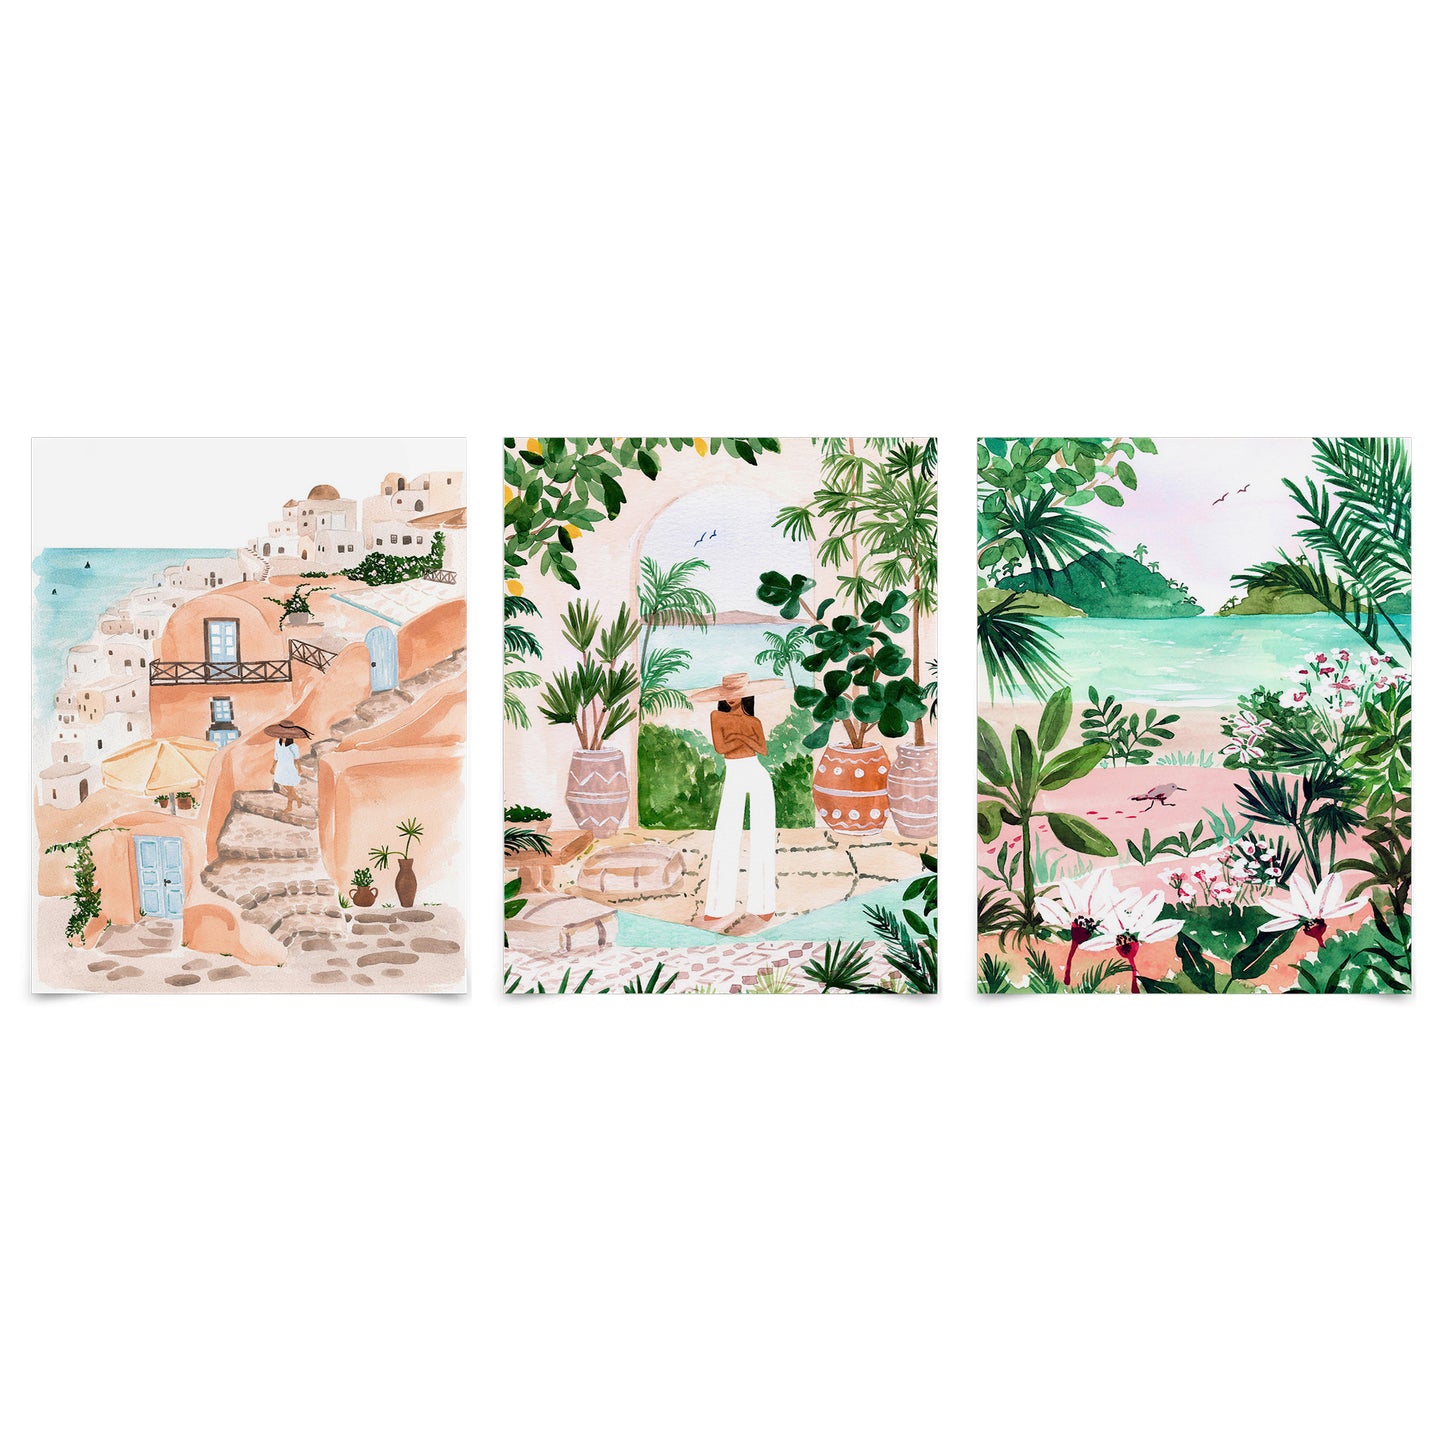 (Set of 3) Triptych Wall Art Beach and Botanical Travels by Sabina Fenn - Poster Print